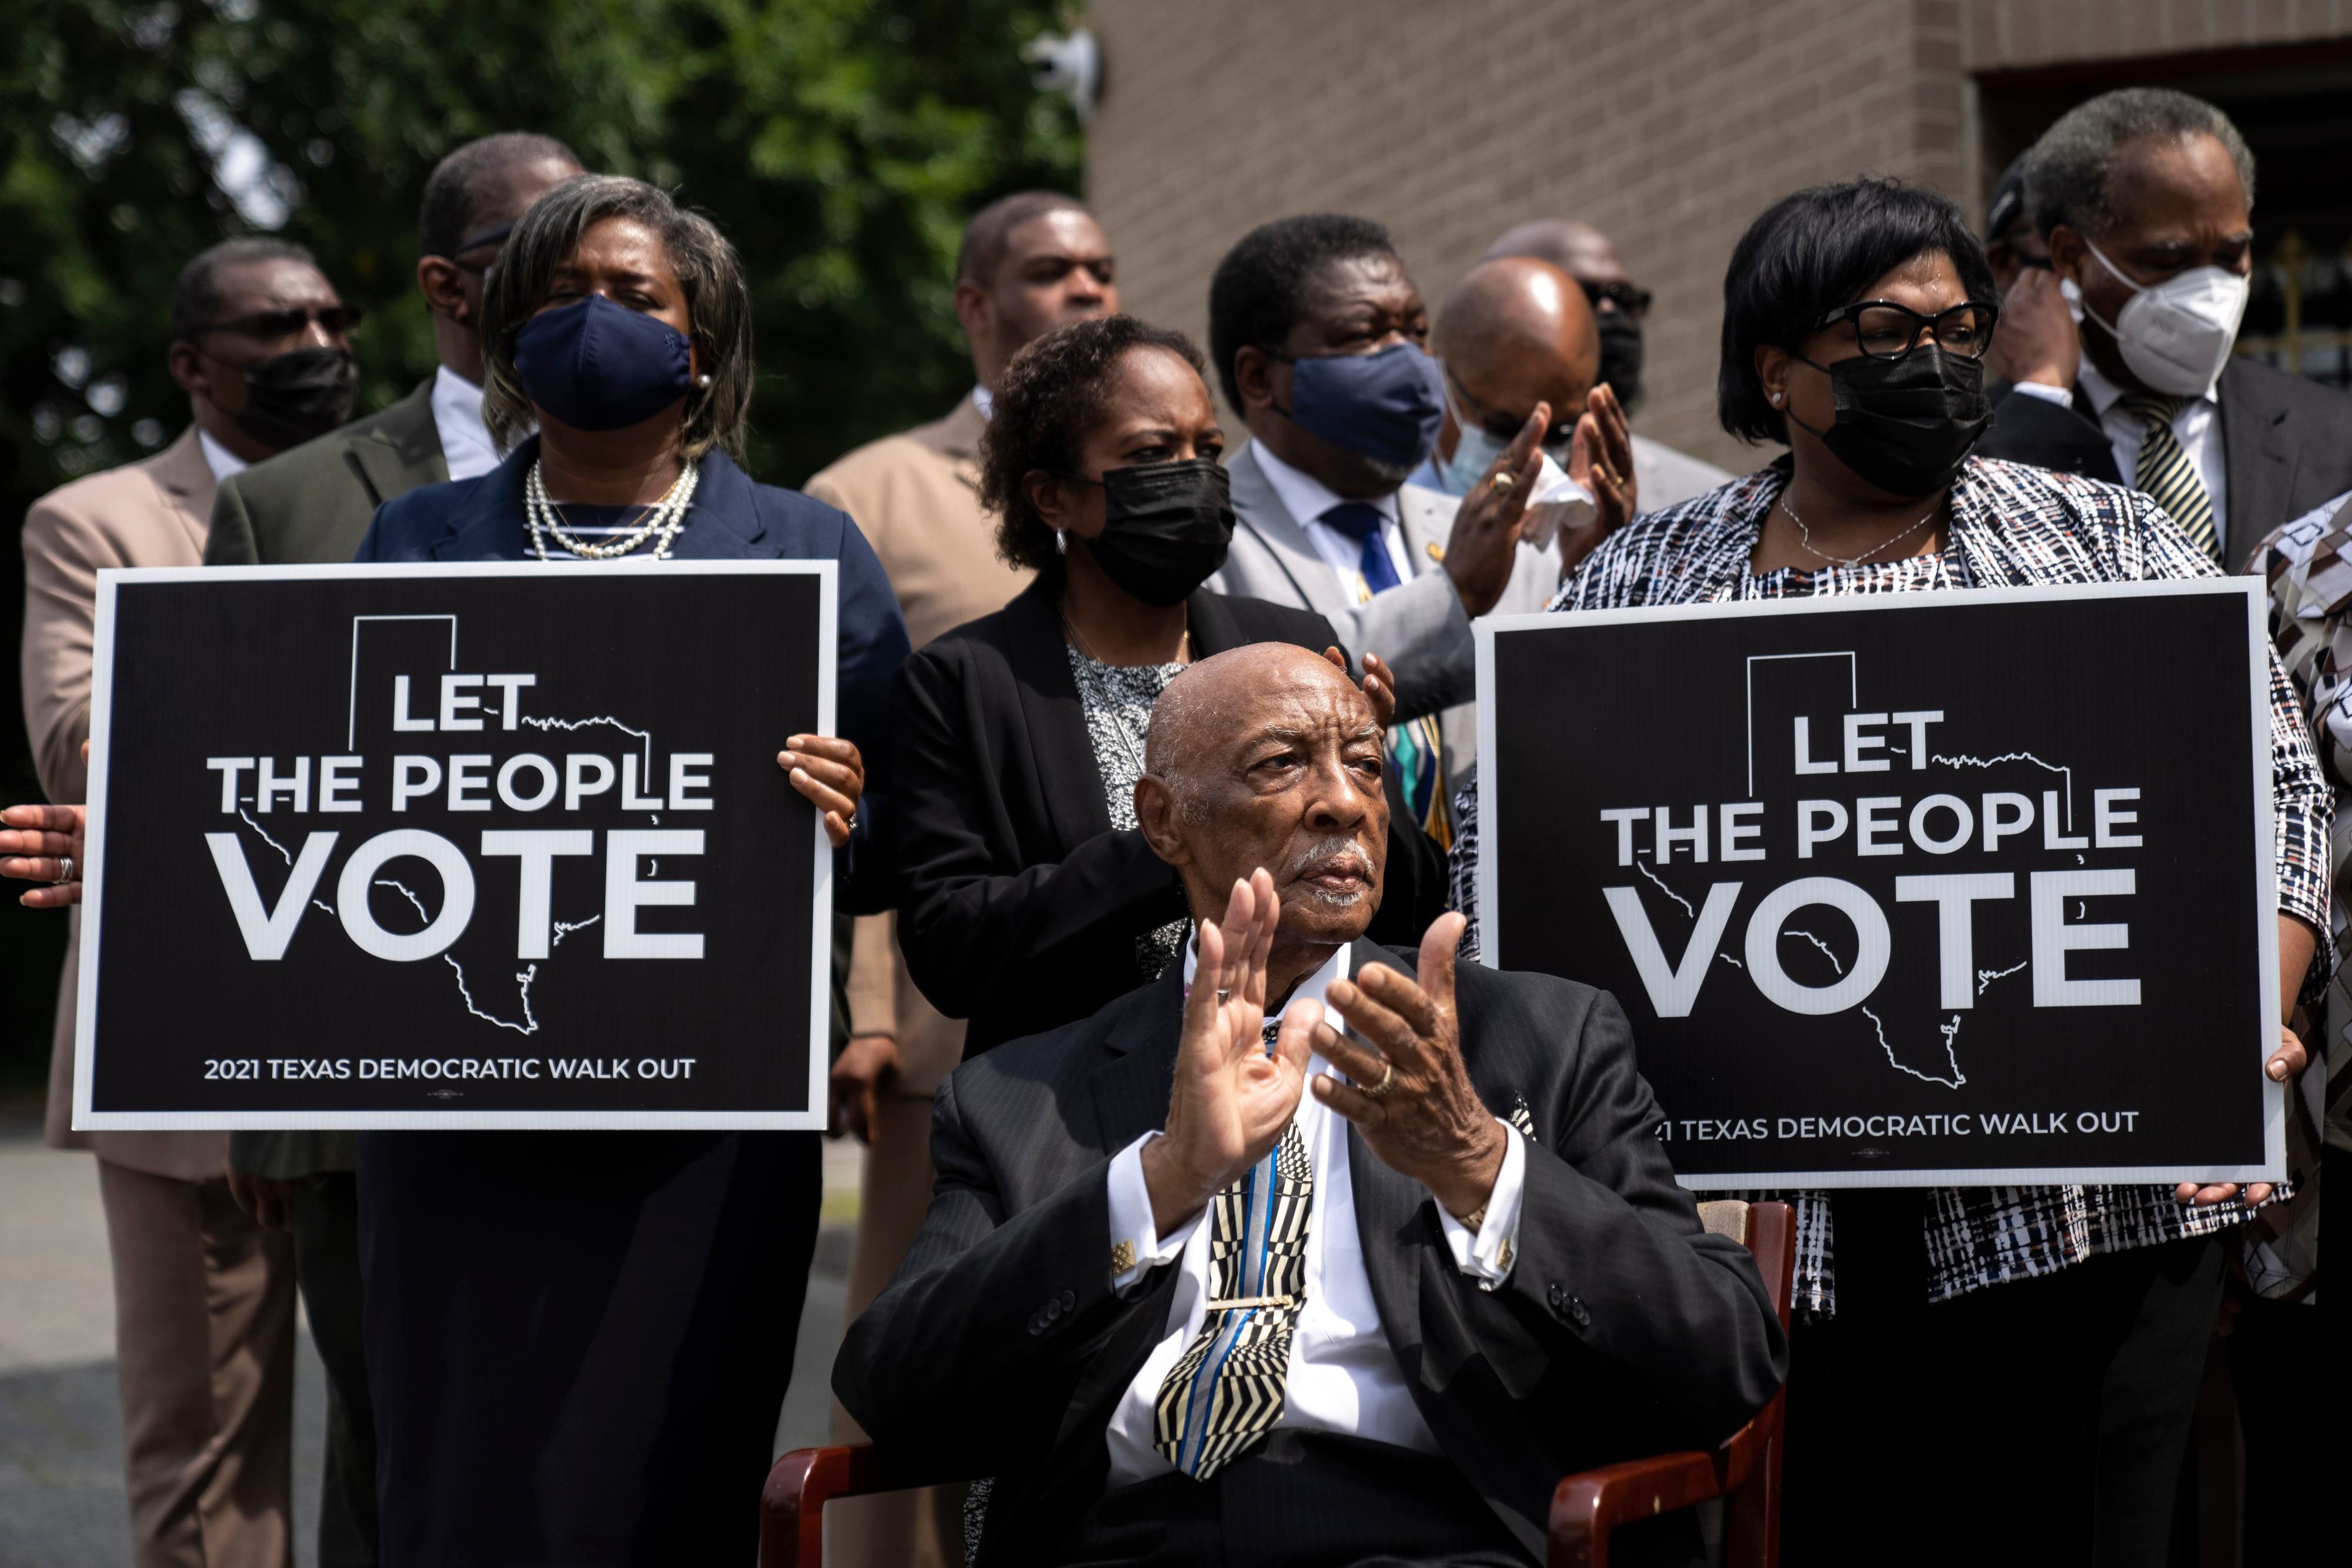 Voting rights in light of January 6 insurrection